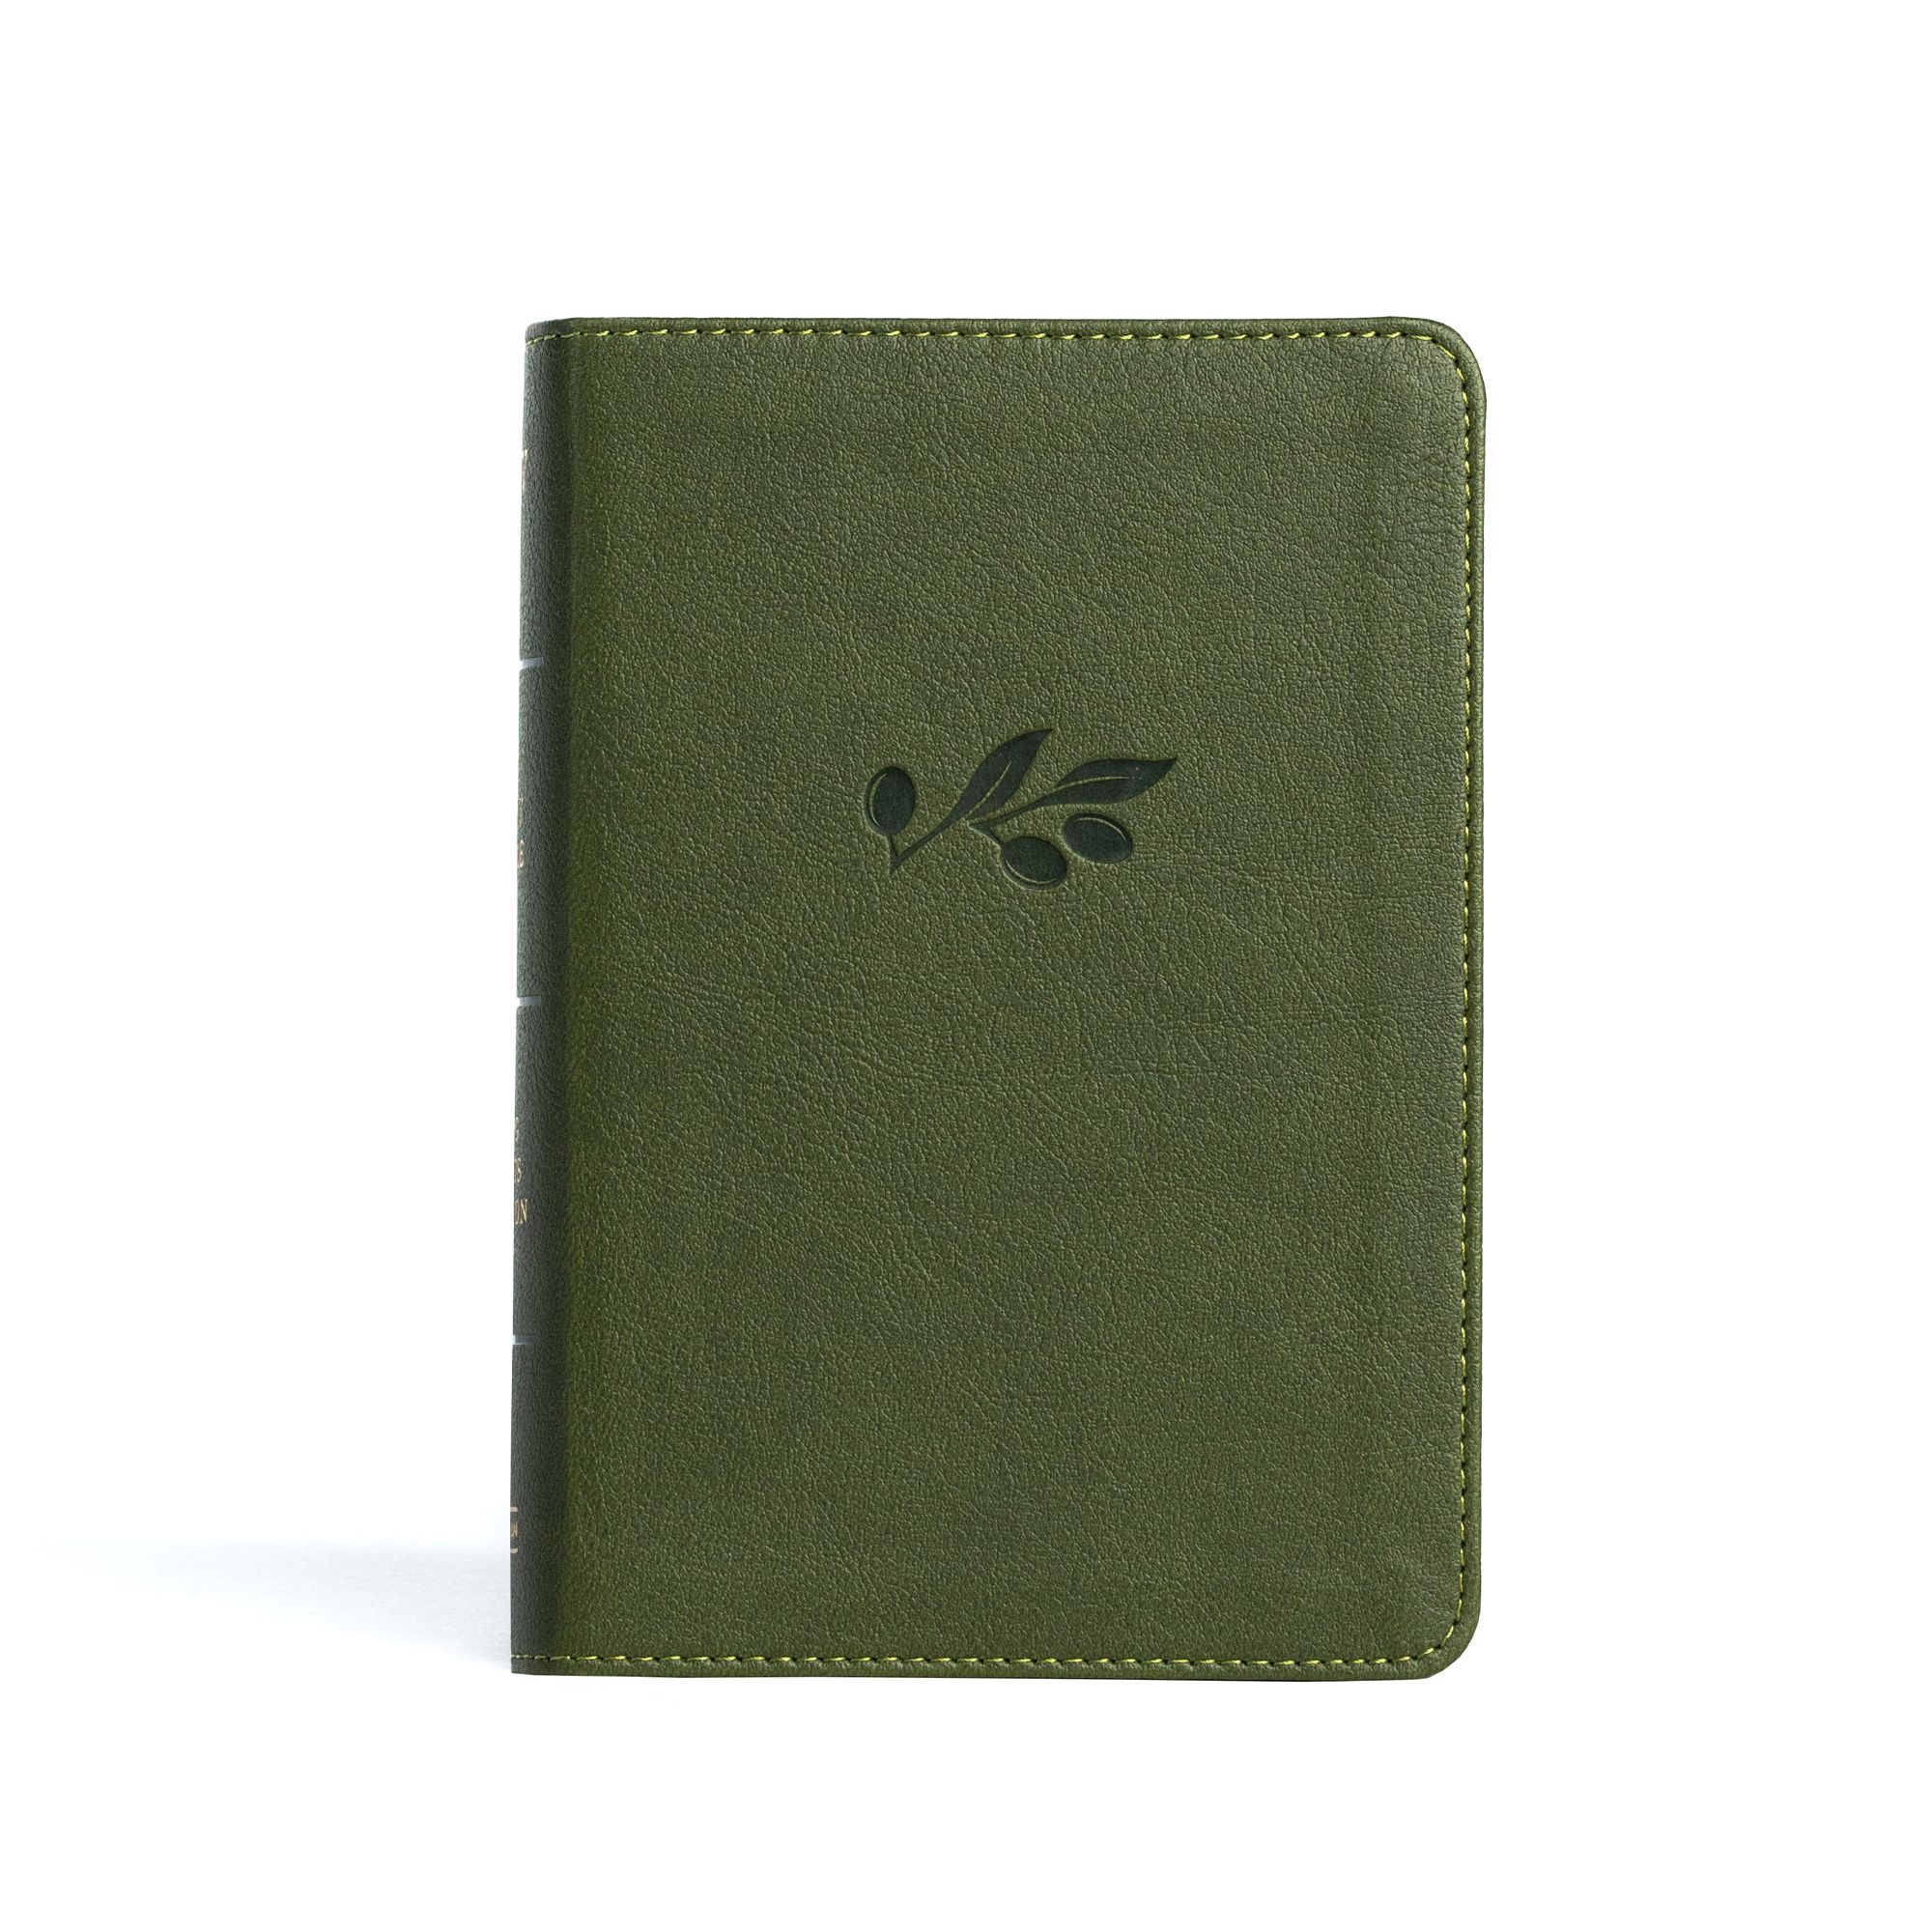 KJV Large Print Compact Reference Bible, Olive LeatherTouch